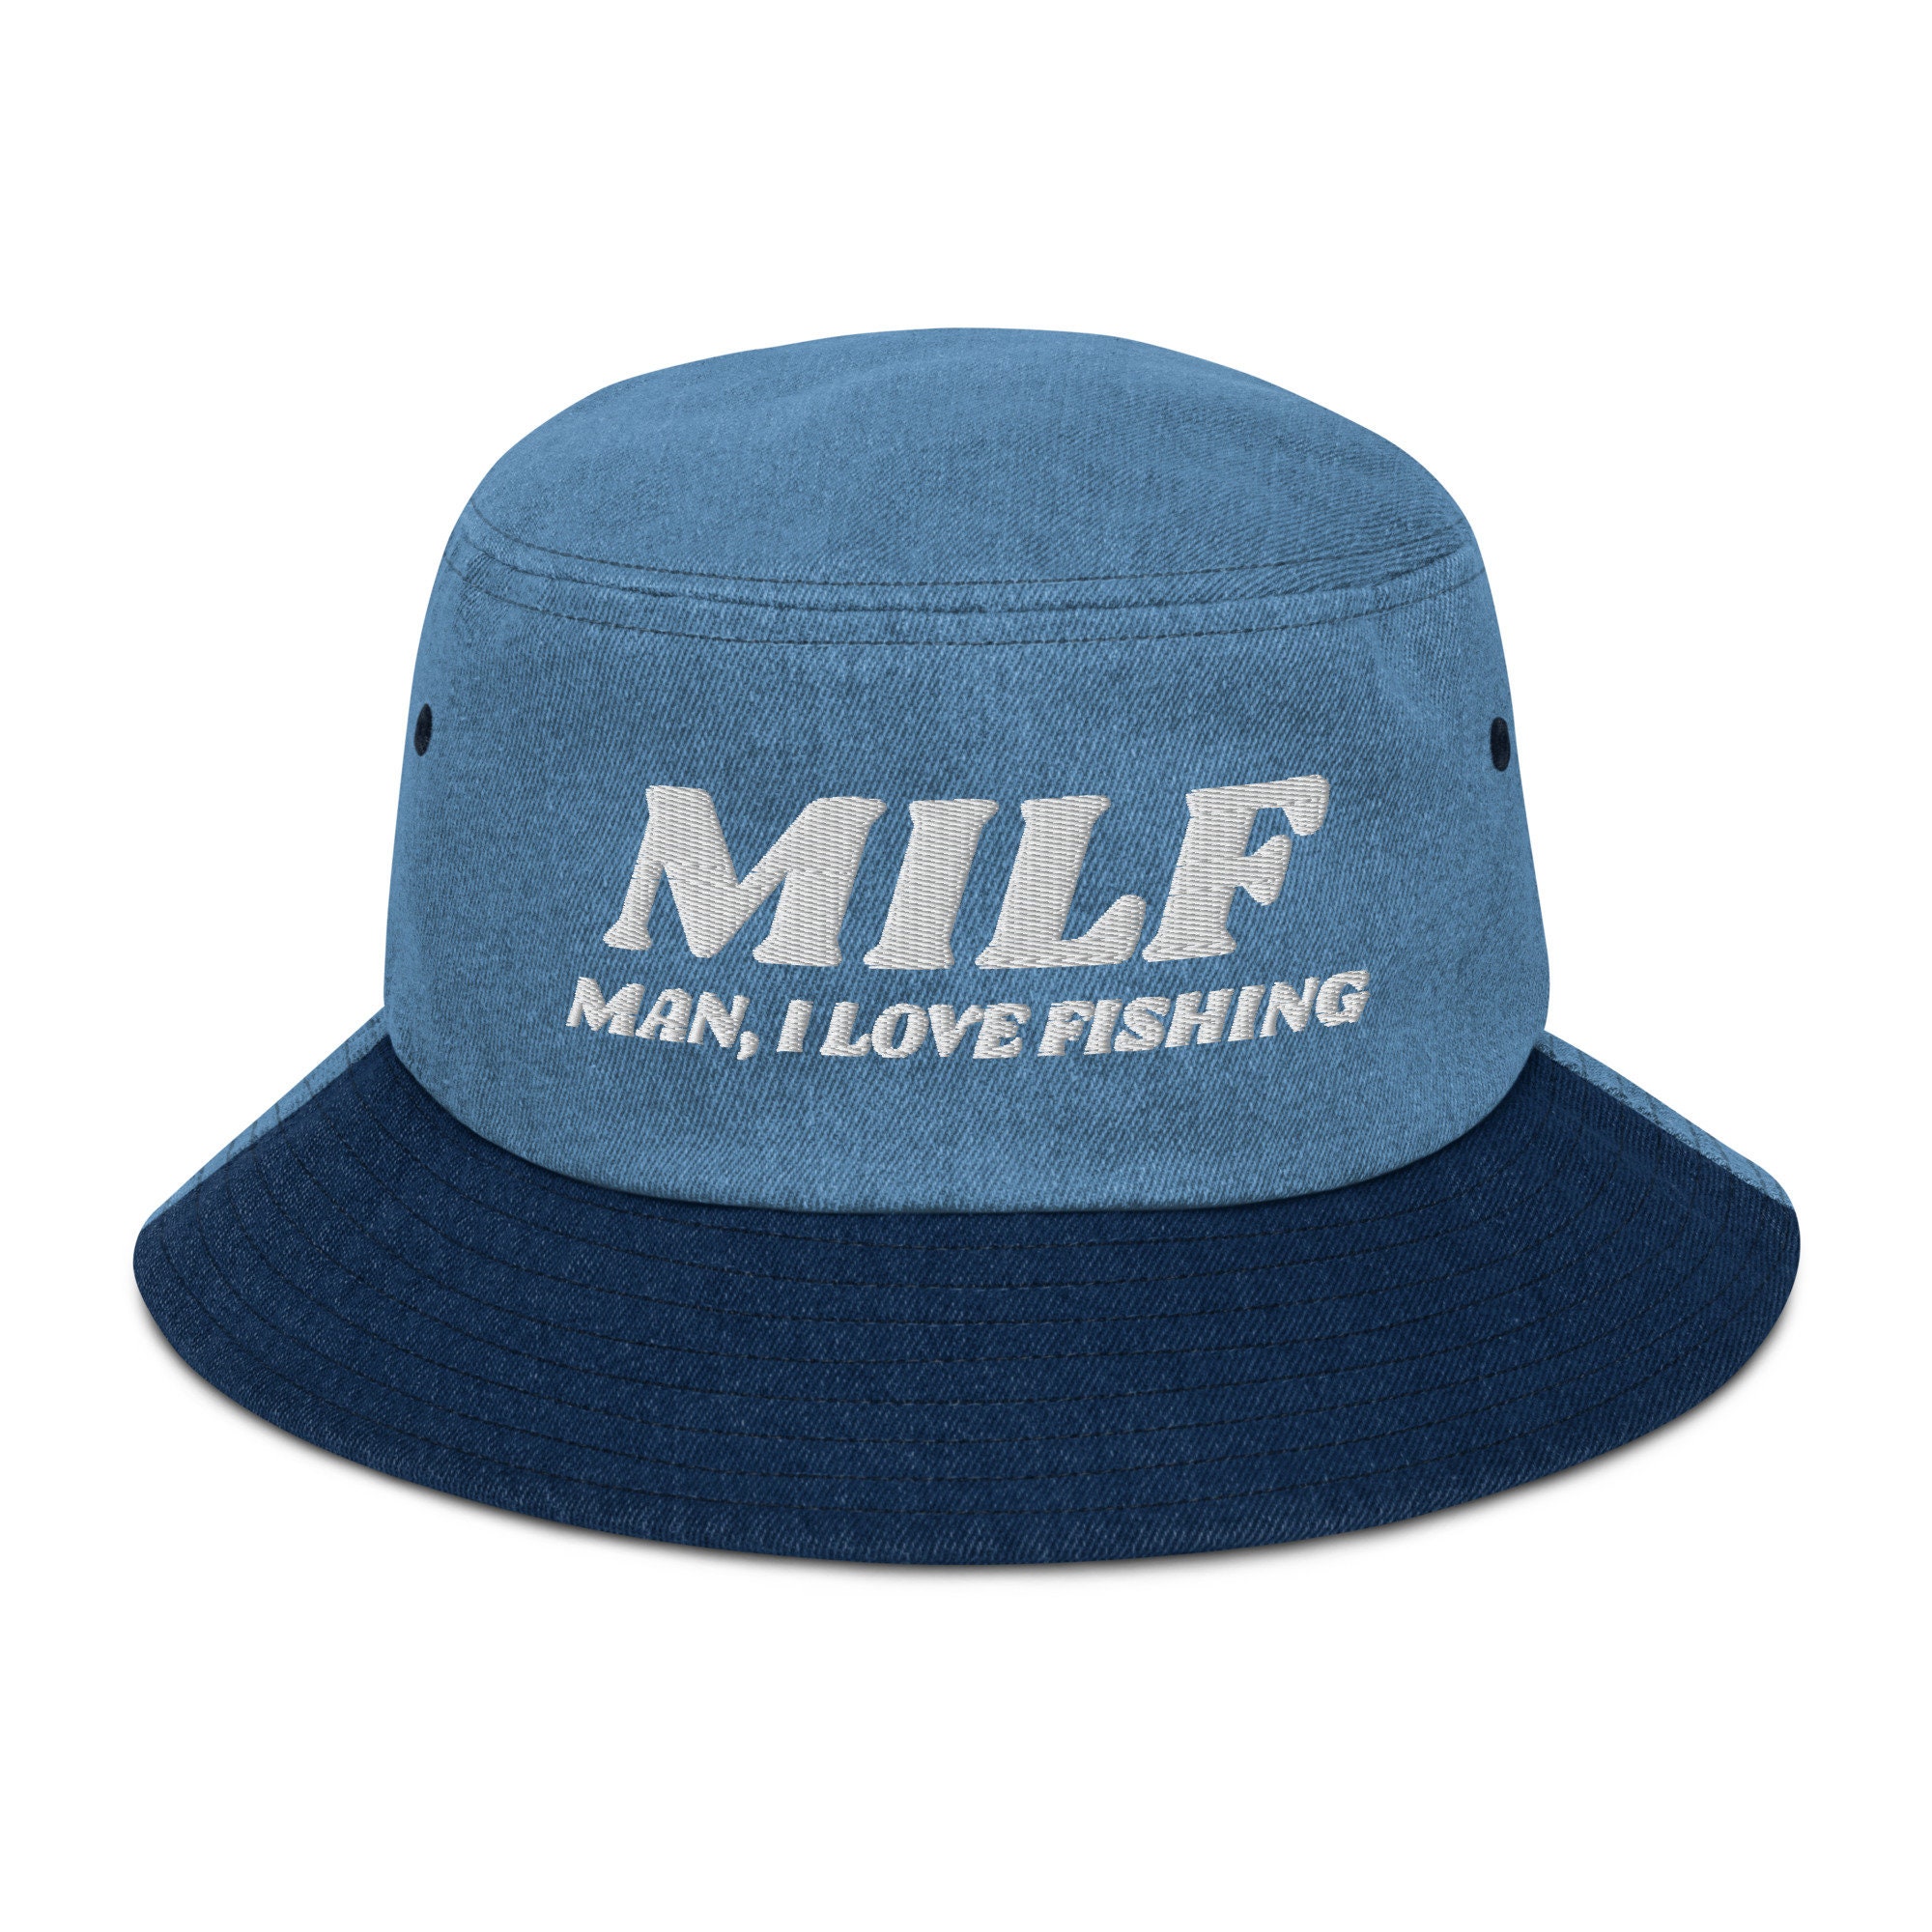 MILF - Man, I Love Fishing - Funny Embroidered Denim Bucket Hat, Hat Gift For FIshing Lovers, Hat for Fishing Lovers Denim Bucket Hat